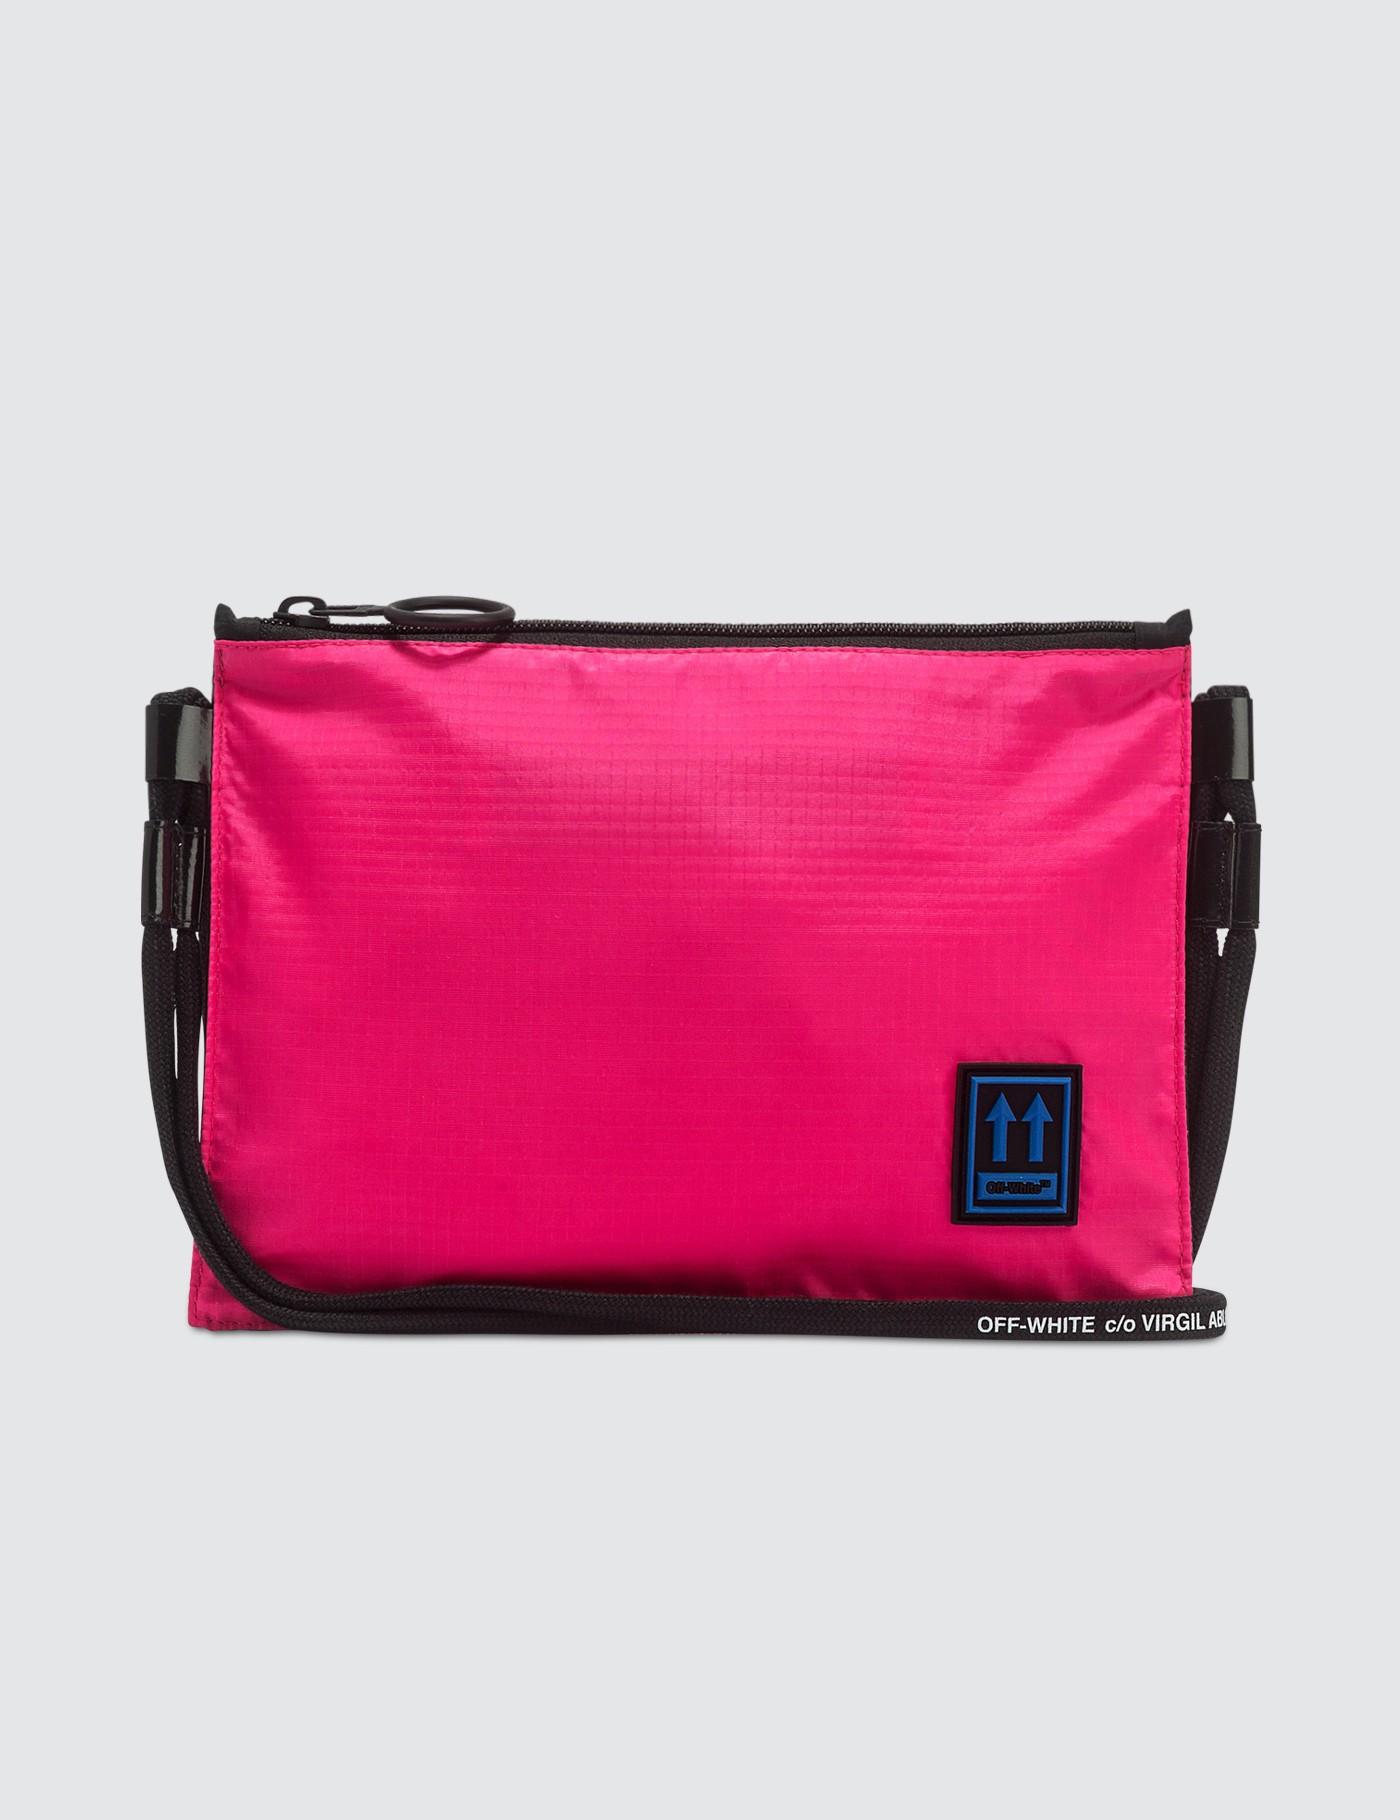 Off-White c/o Virgil Abloh Synthetic Flat Cross Body Bag in Pink for Men - Lyst